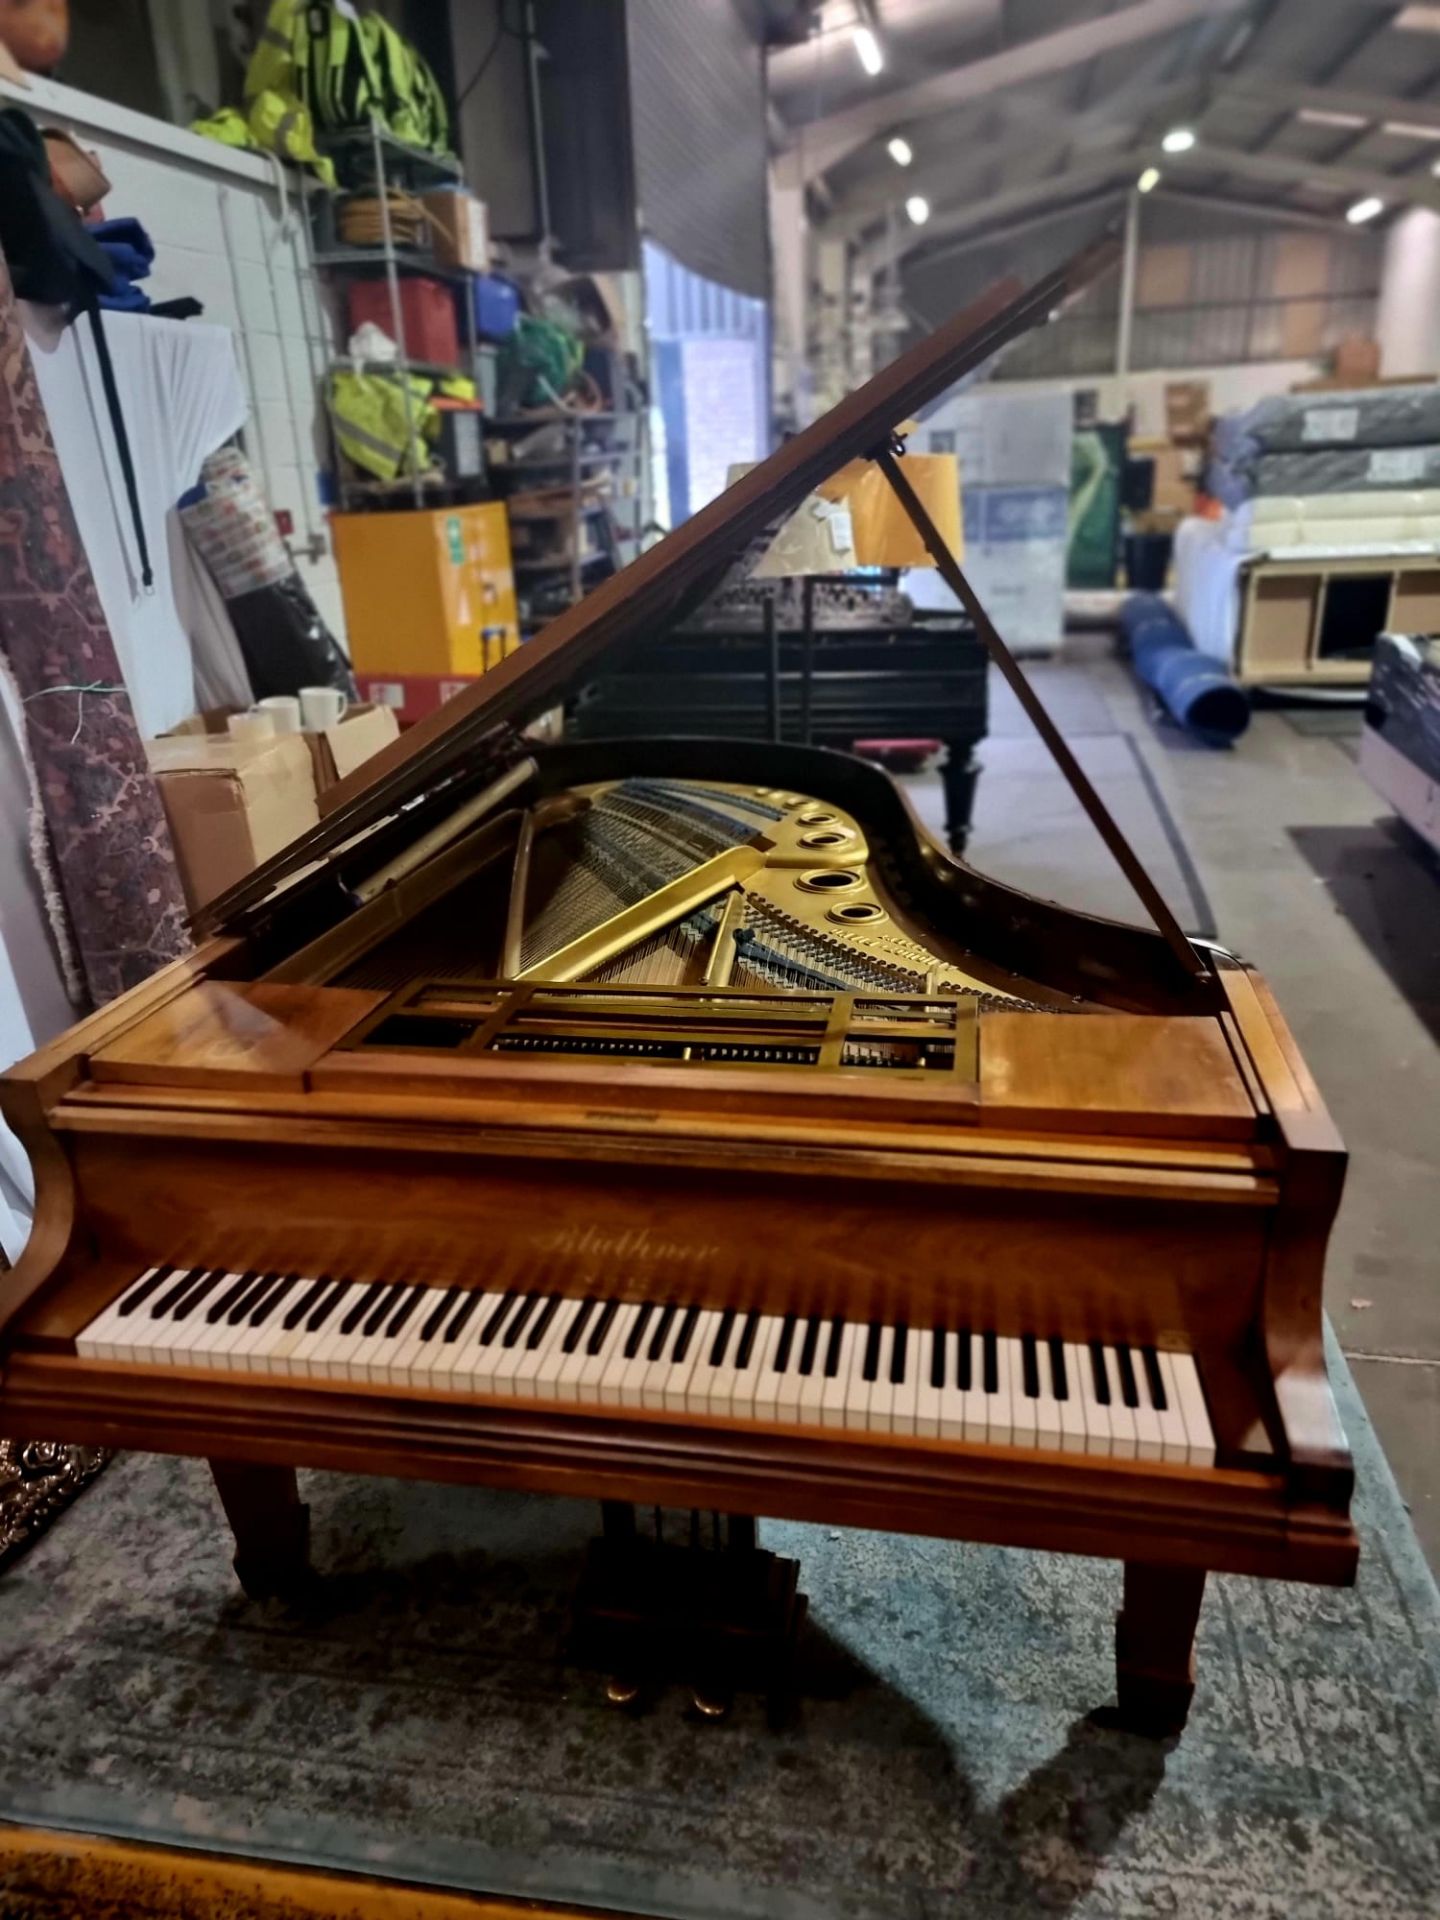 Blunther IX Classic Grand Piano In Rosewood With Blunther Patent Aliquot Stringing System Blunther